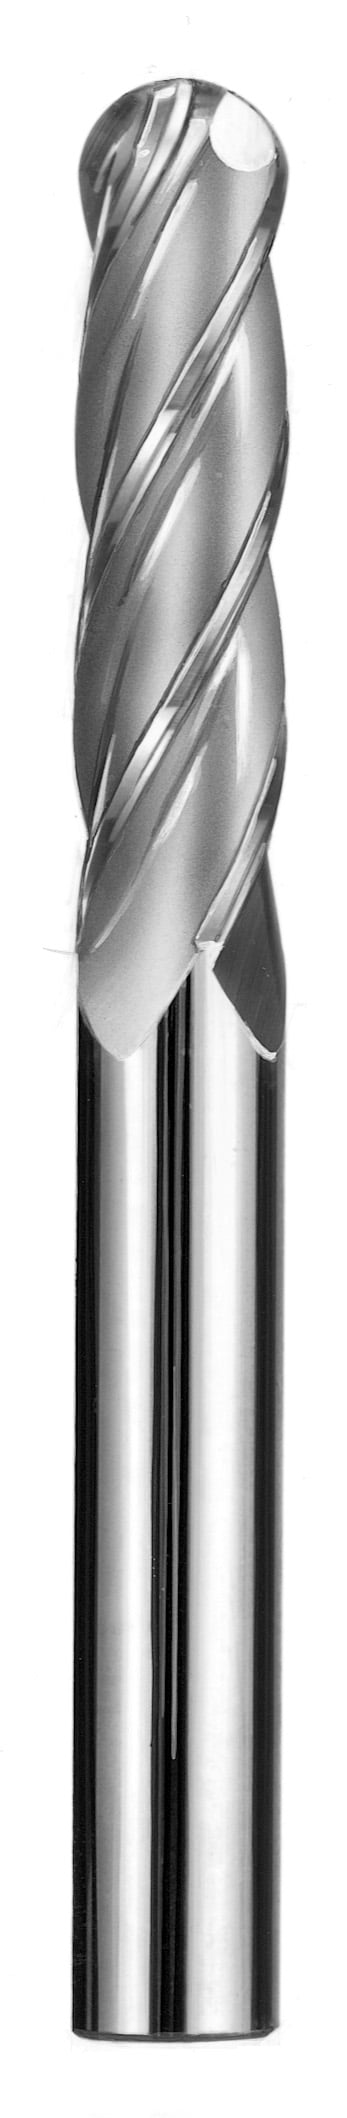 1/4" Dia, 4 Flute, Ball Nose End Mill - 93331